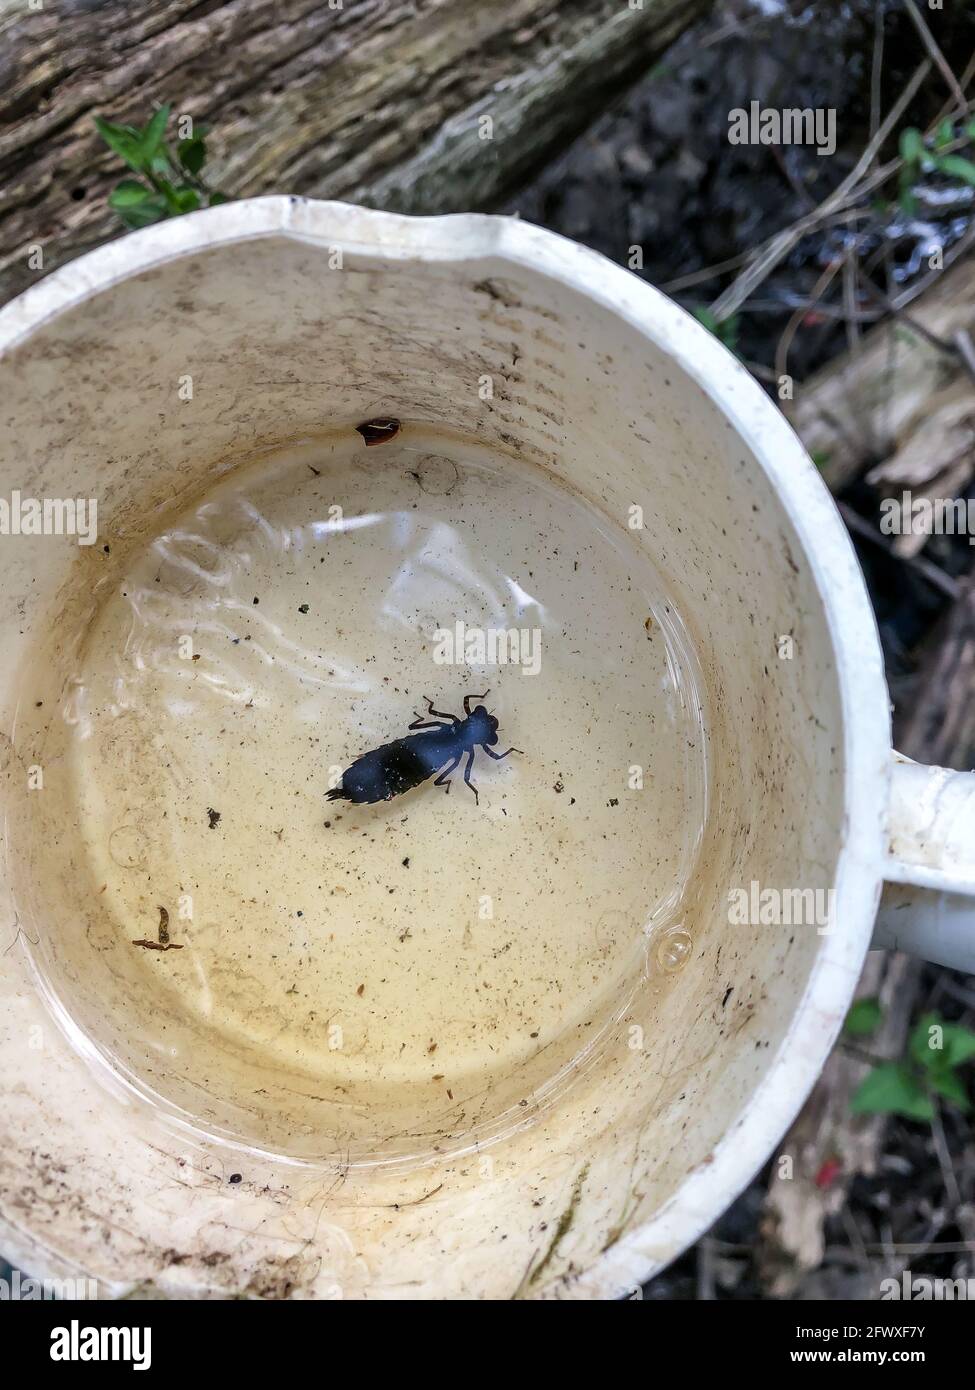 Dragonfly nymph in water in a sample dipper cup Stock Photo